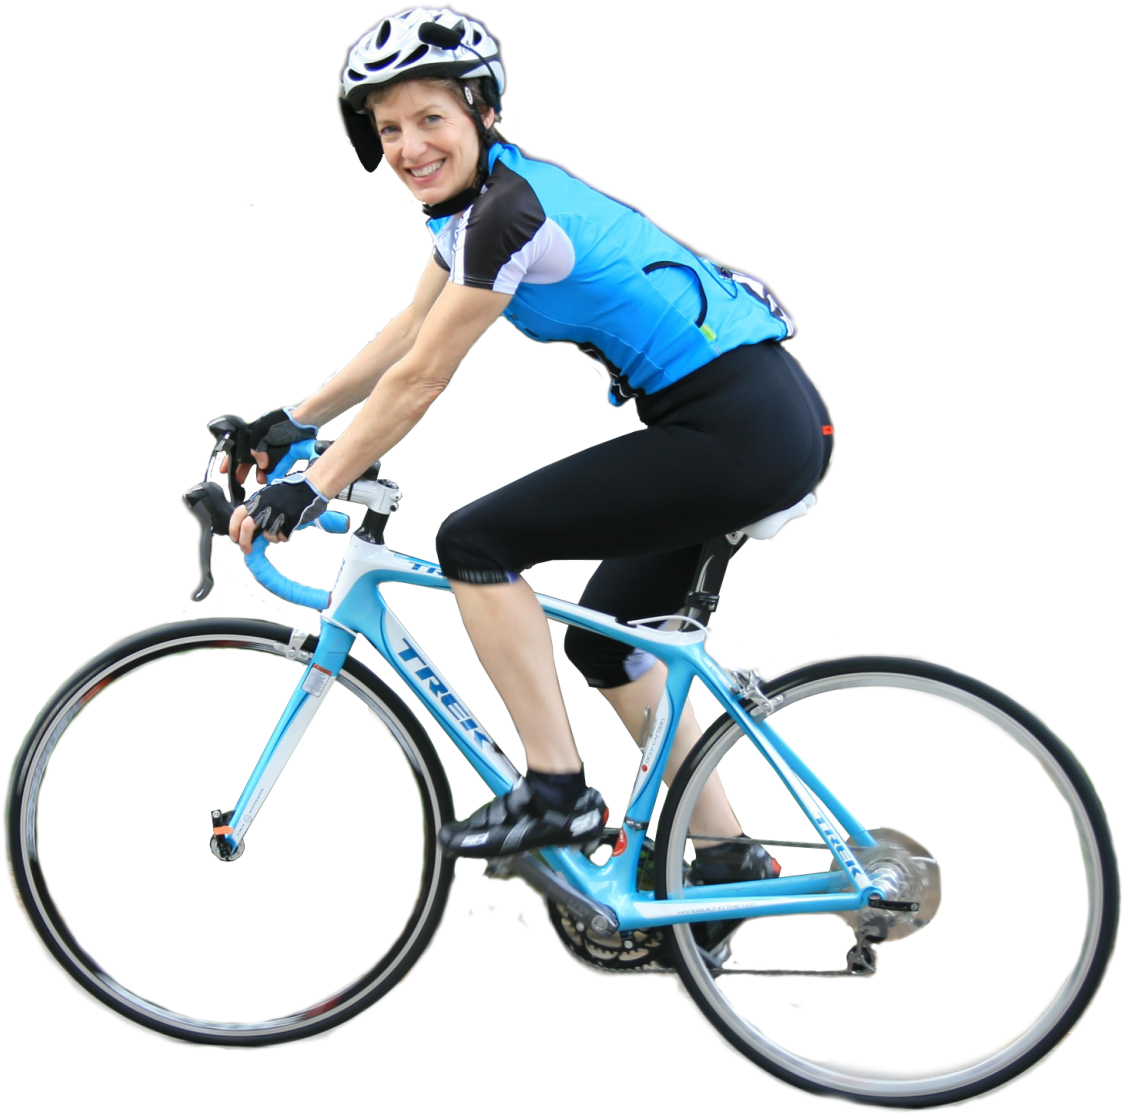 A Woman Riding A Bicycle